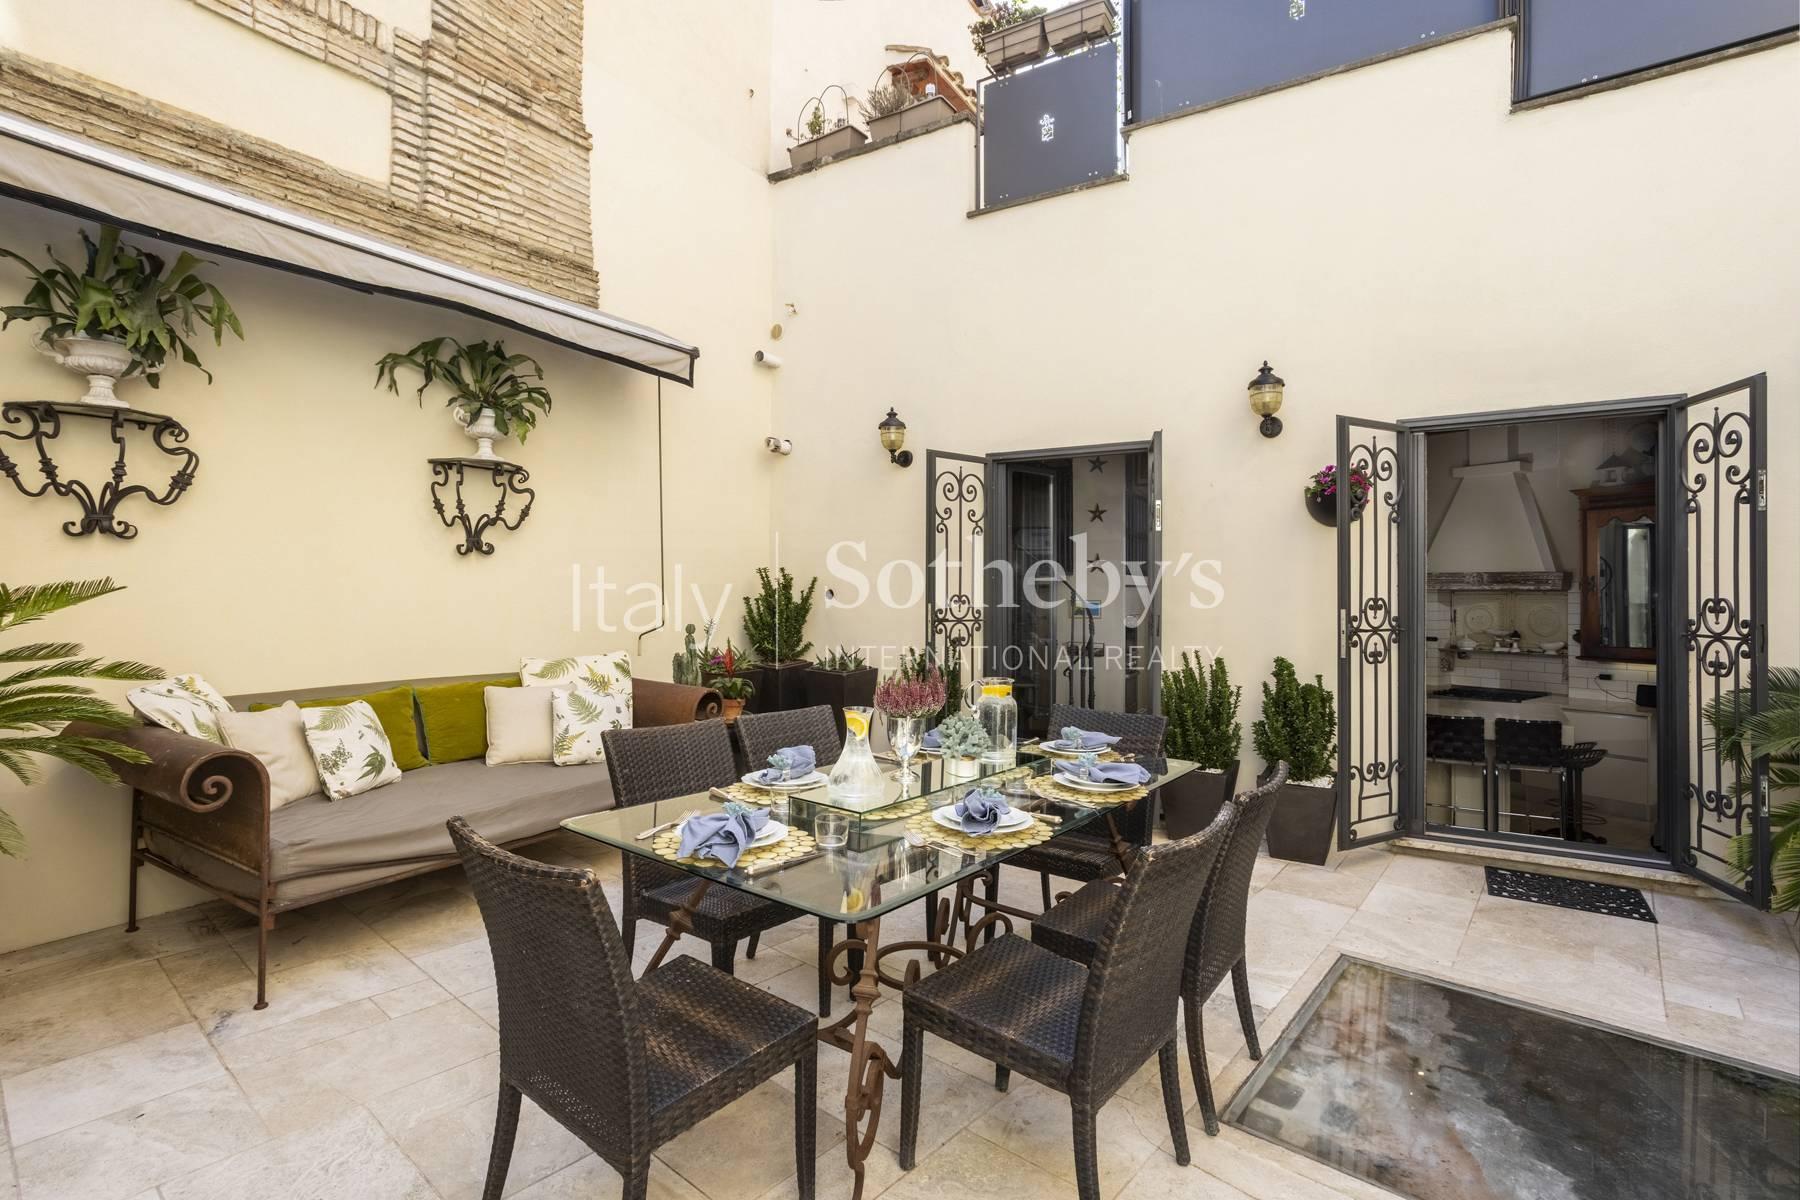 Apartment with terraces a stone's throw from Piazza Navona - 11